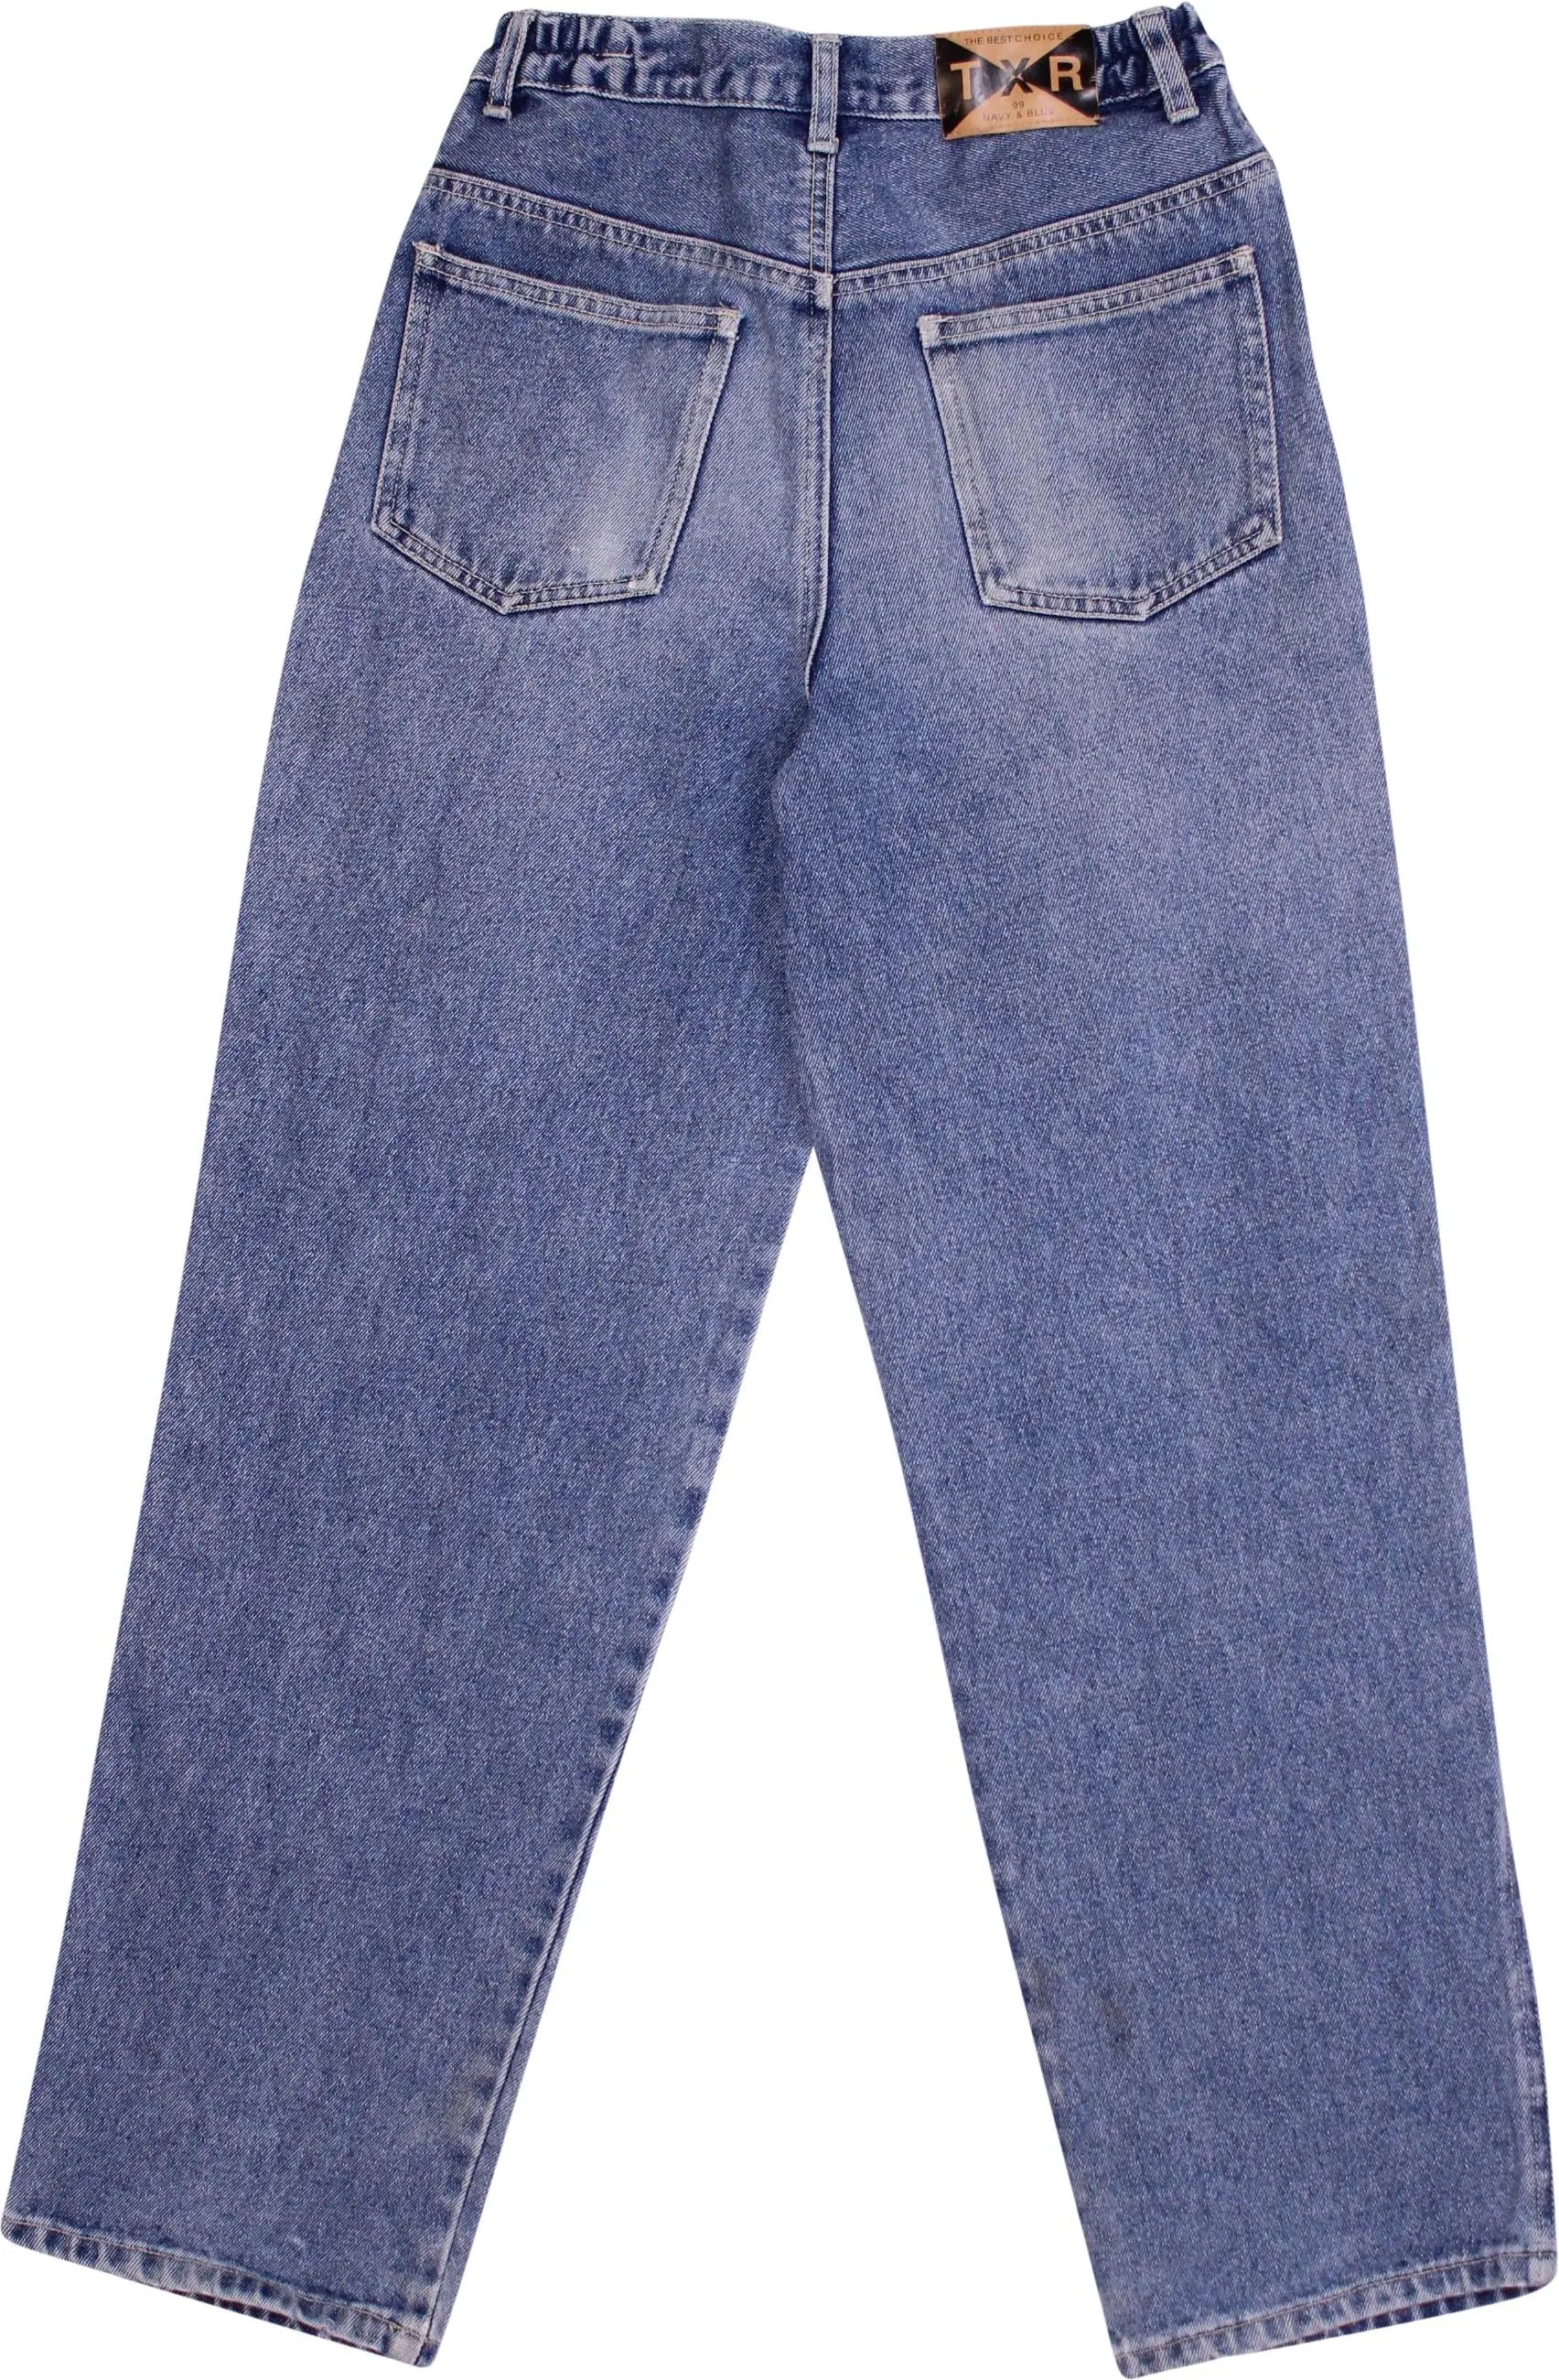 T x R - Vintage High Waisted Jeans- ThriftTale.com - Vintage and second handclothing